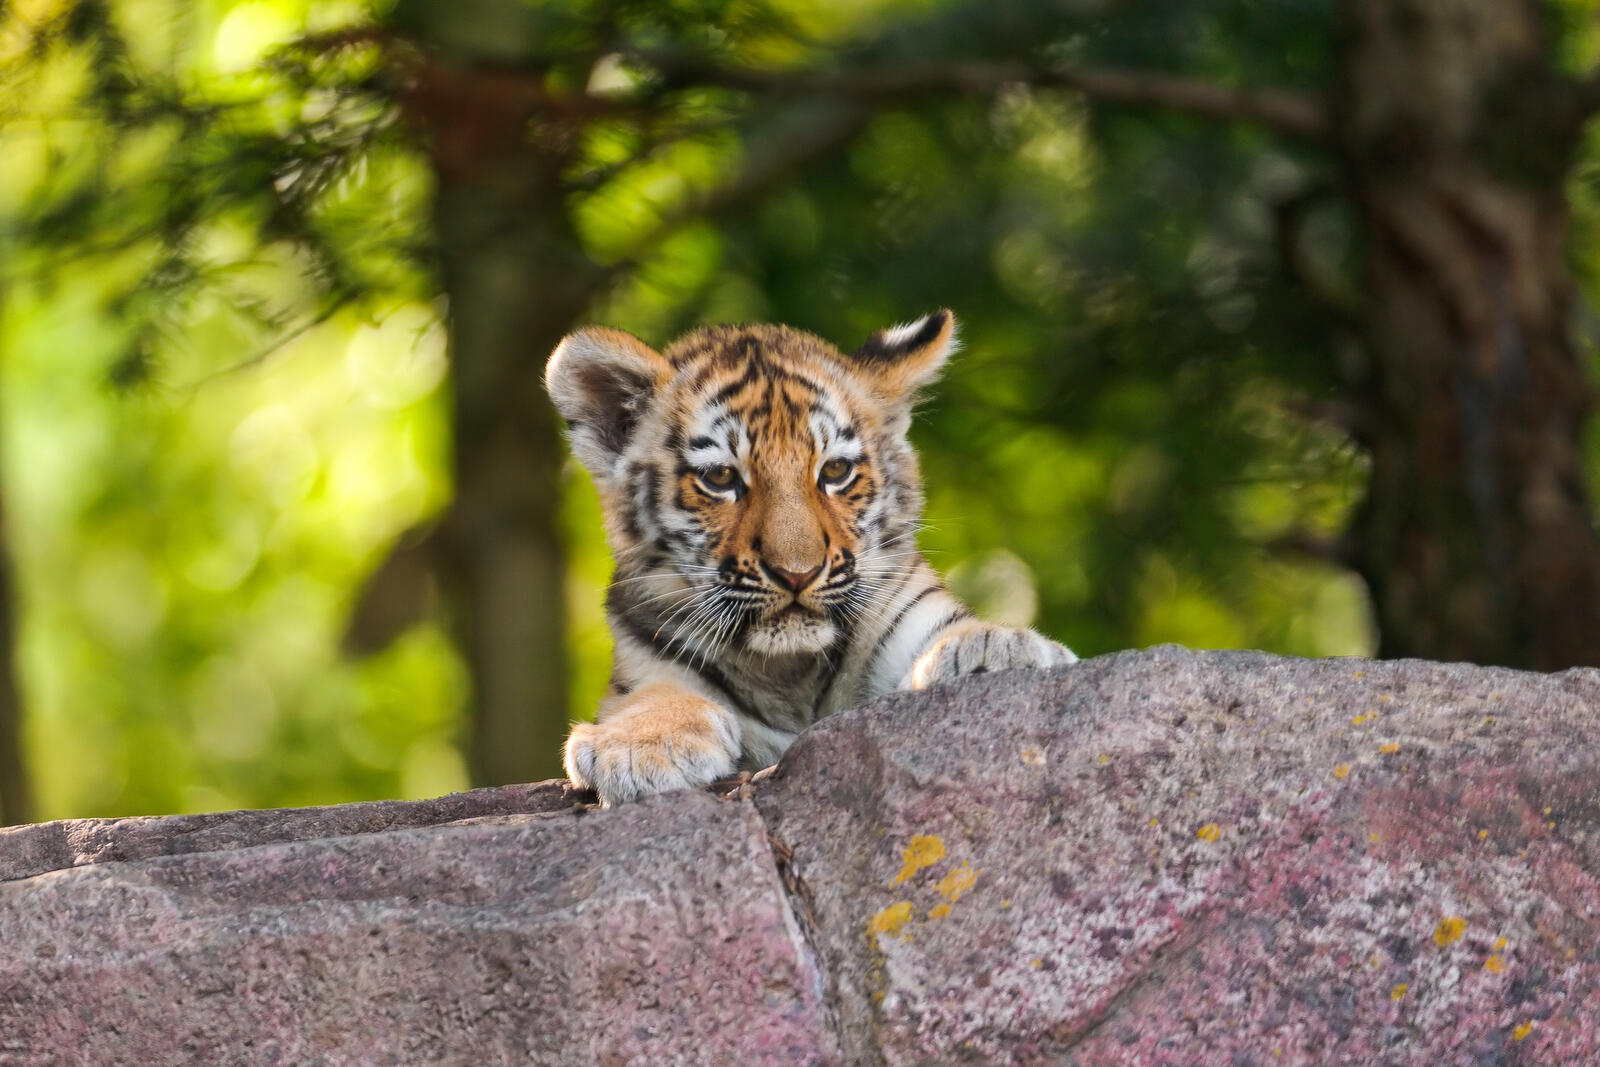 Wallpapers tiger cub striped animal on the desktop